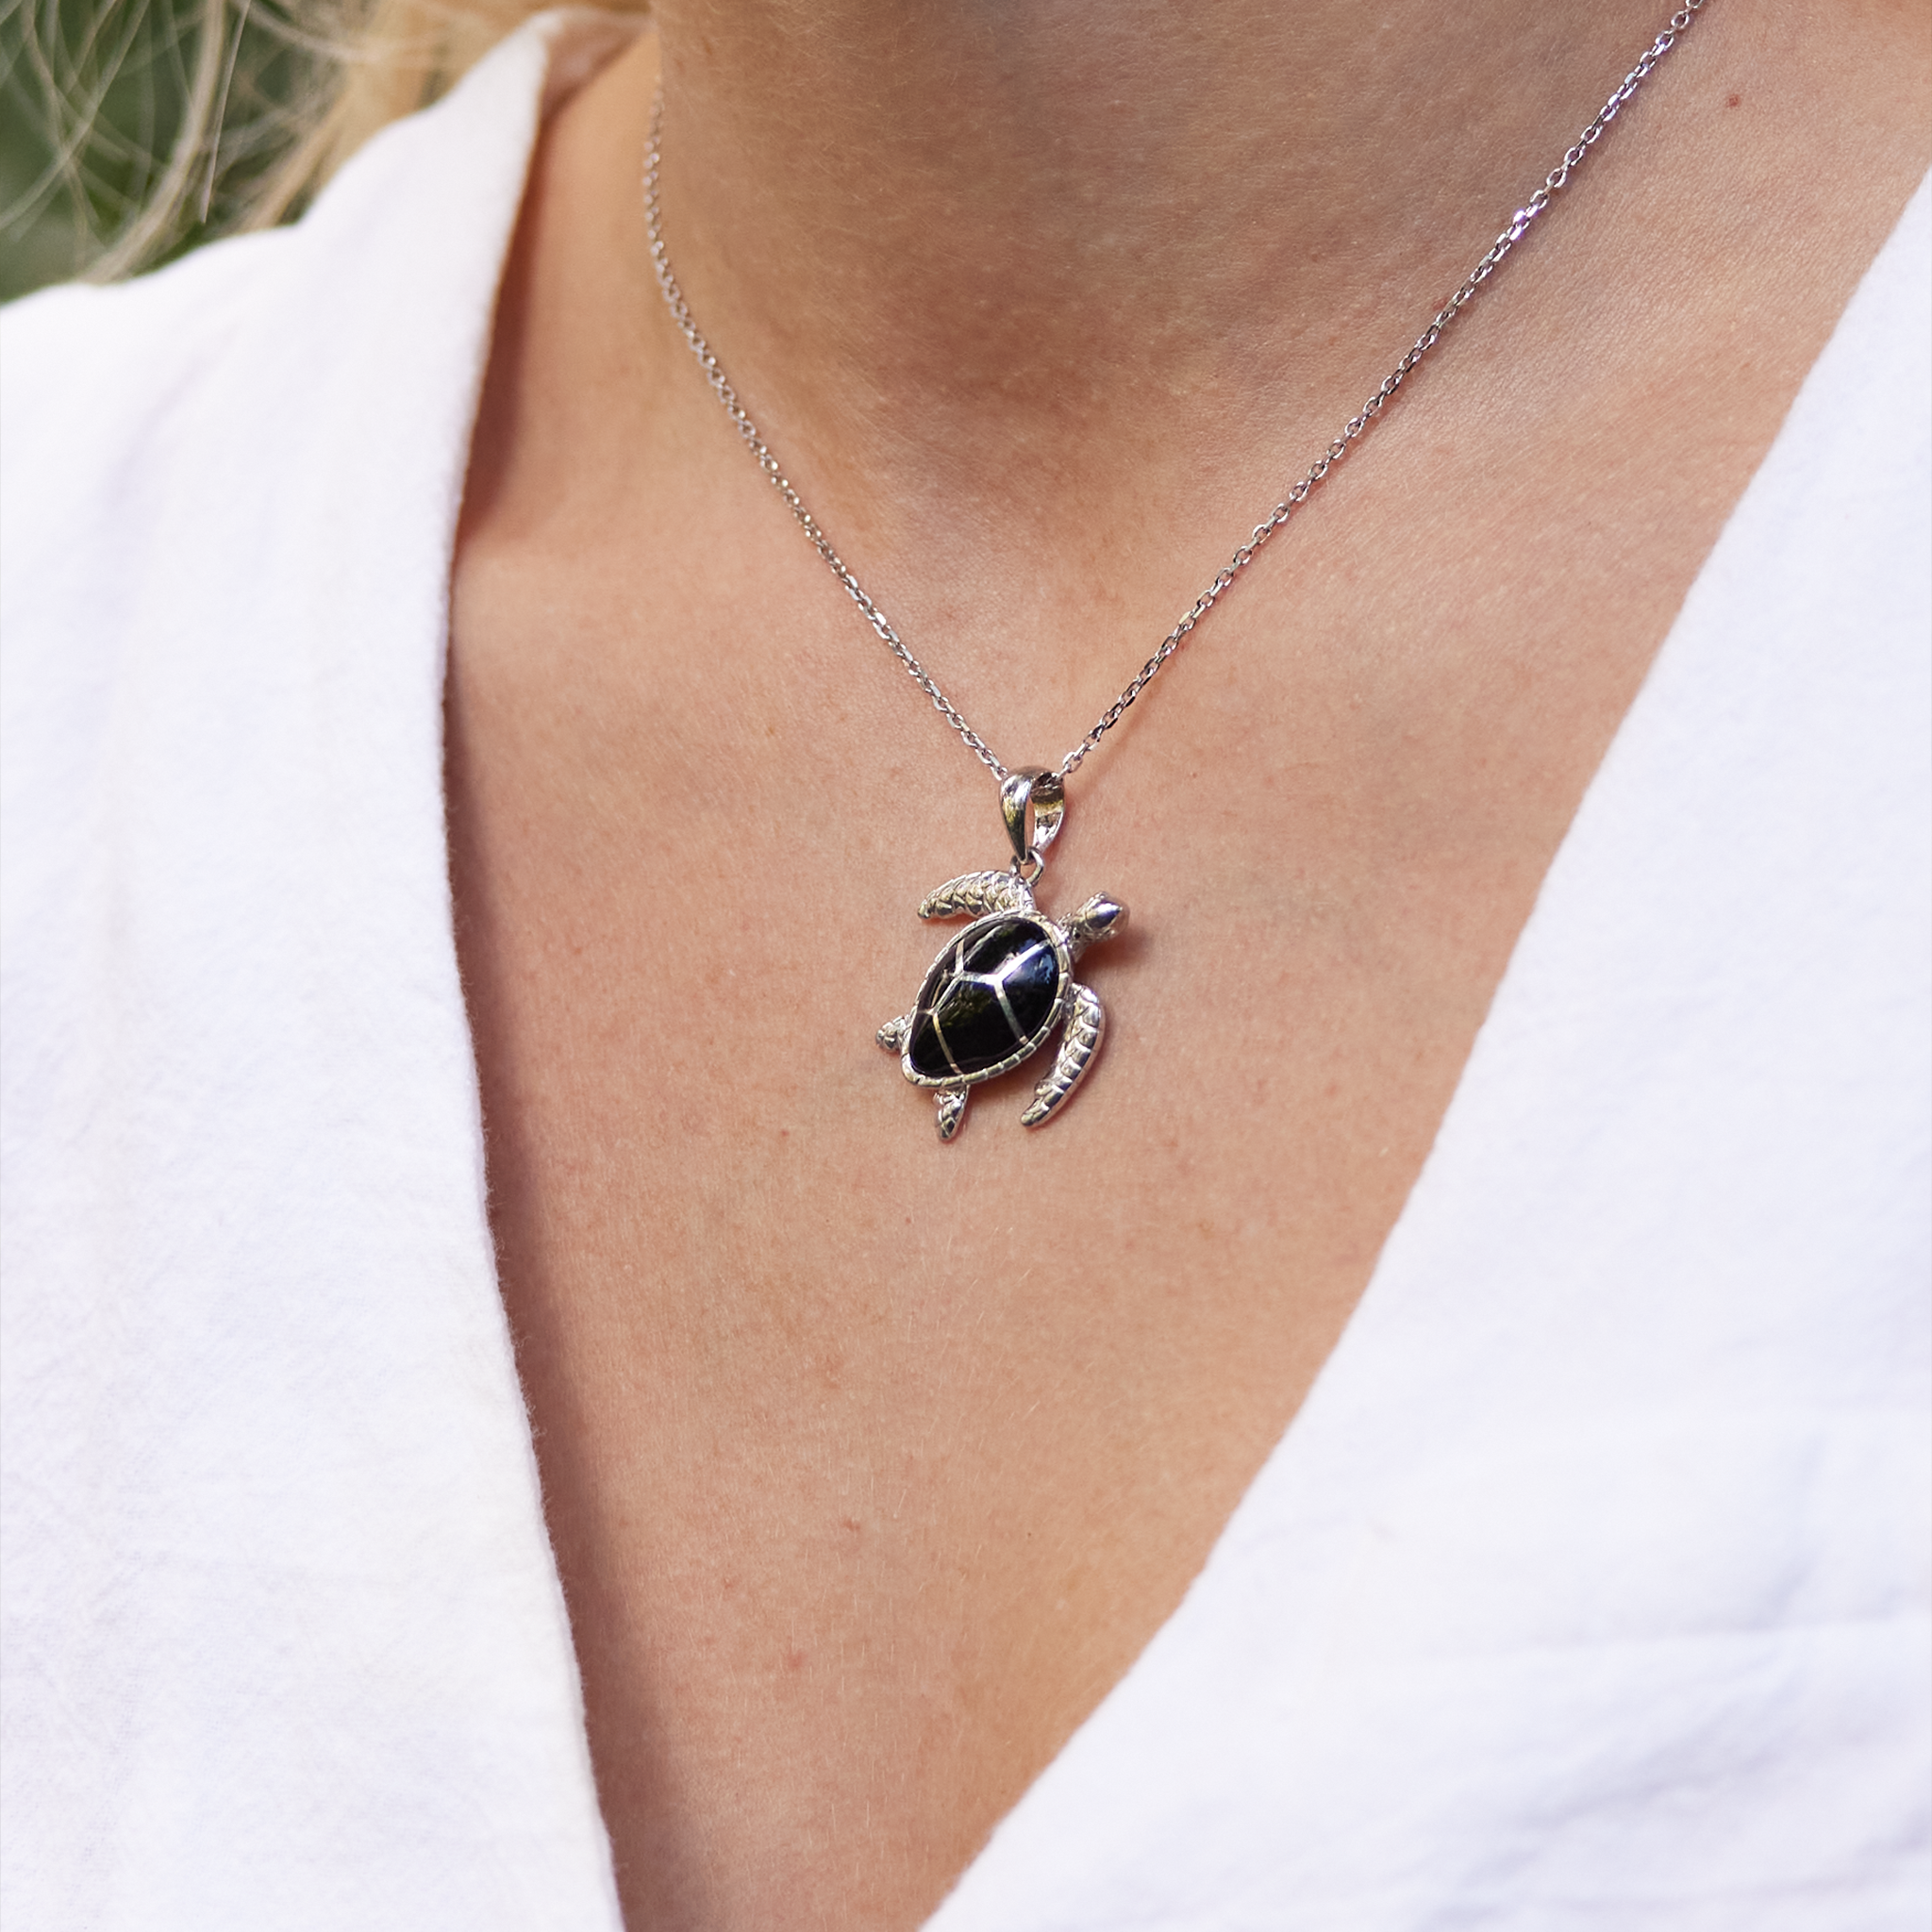 Honu Black Coral Pendant in Sterling Silver on Womanʻs neckline